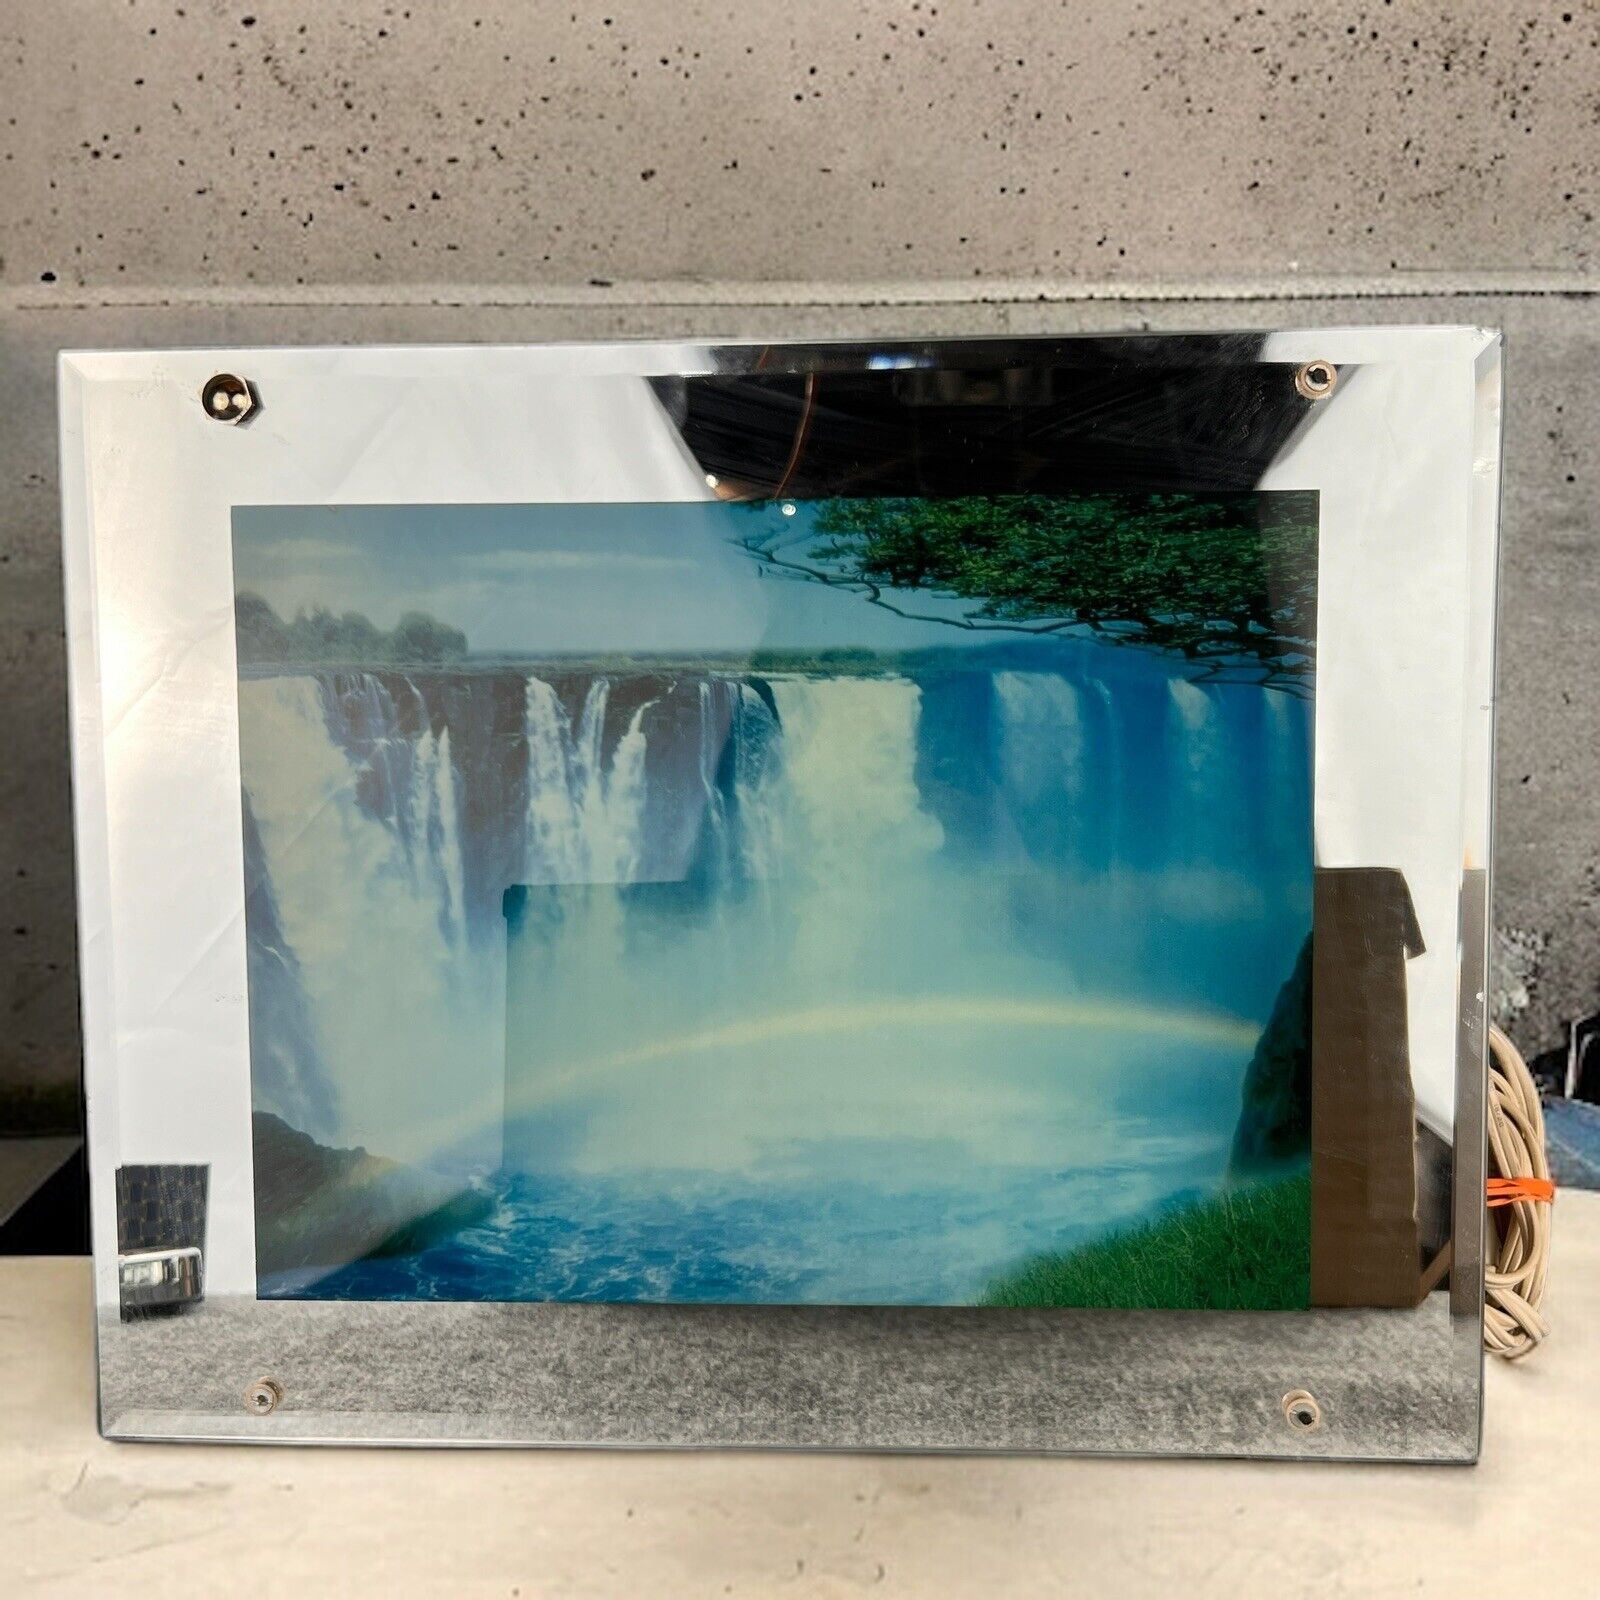 Vintage Visiontac Light Box Moving Picture Motion Nature Sound Waterfall Mirror